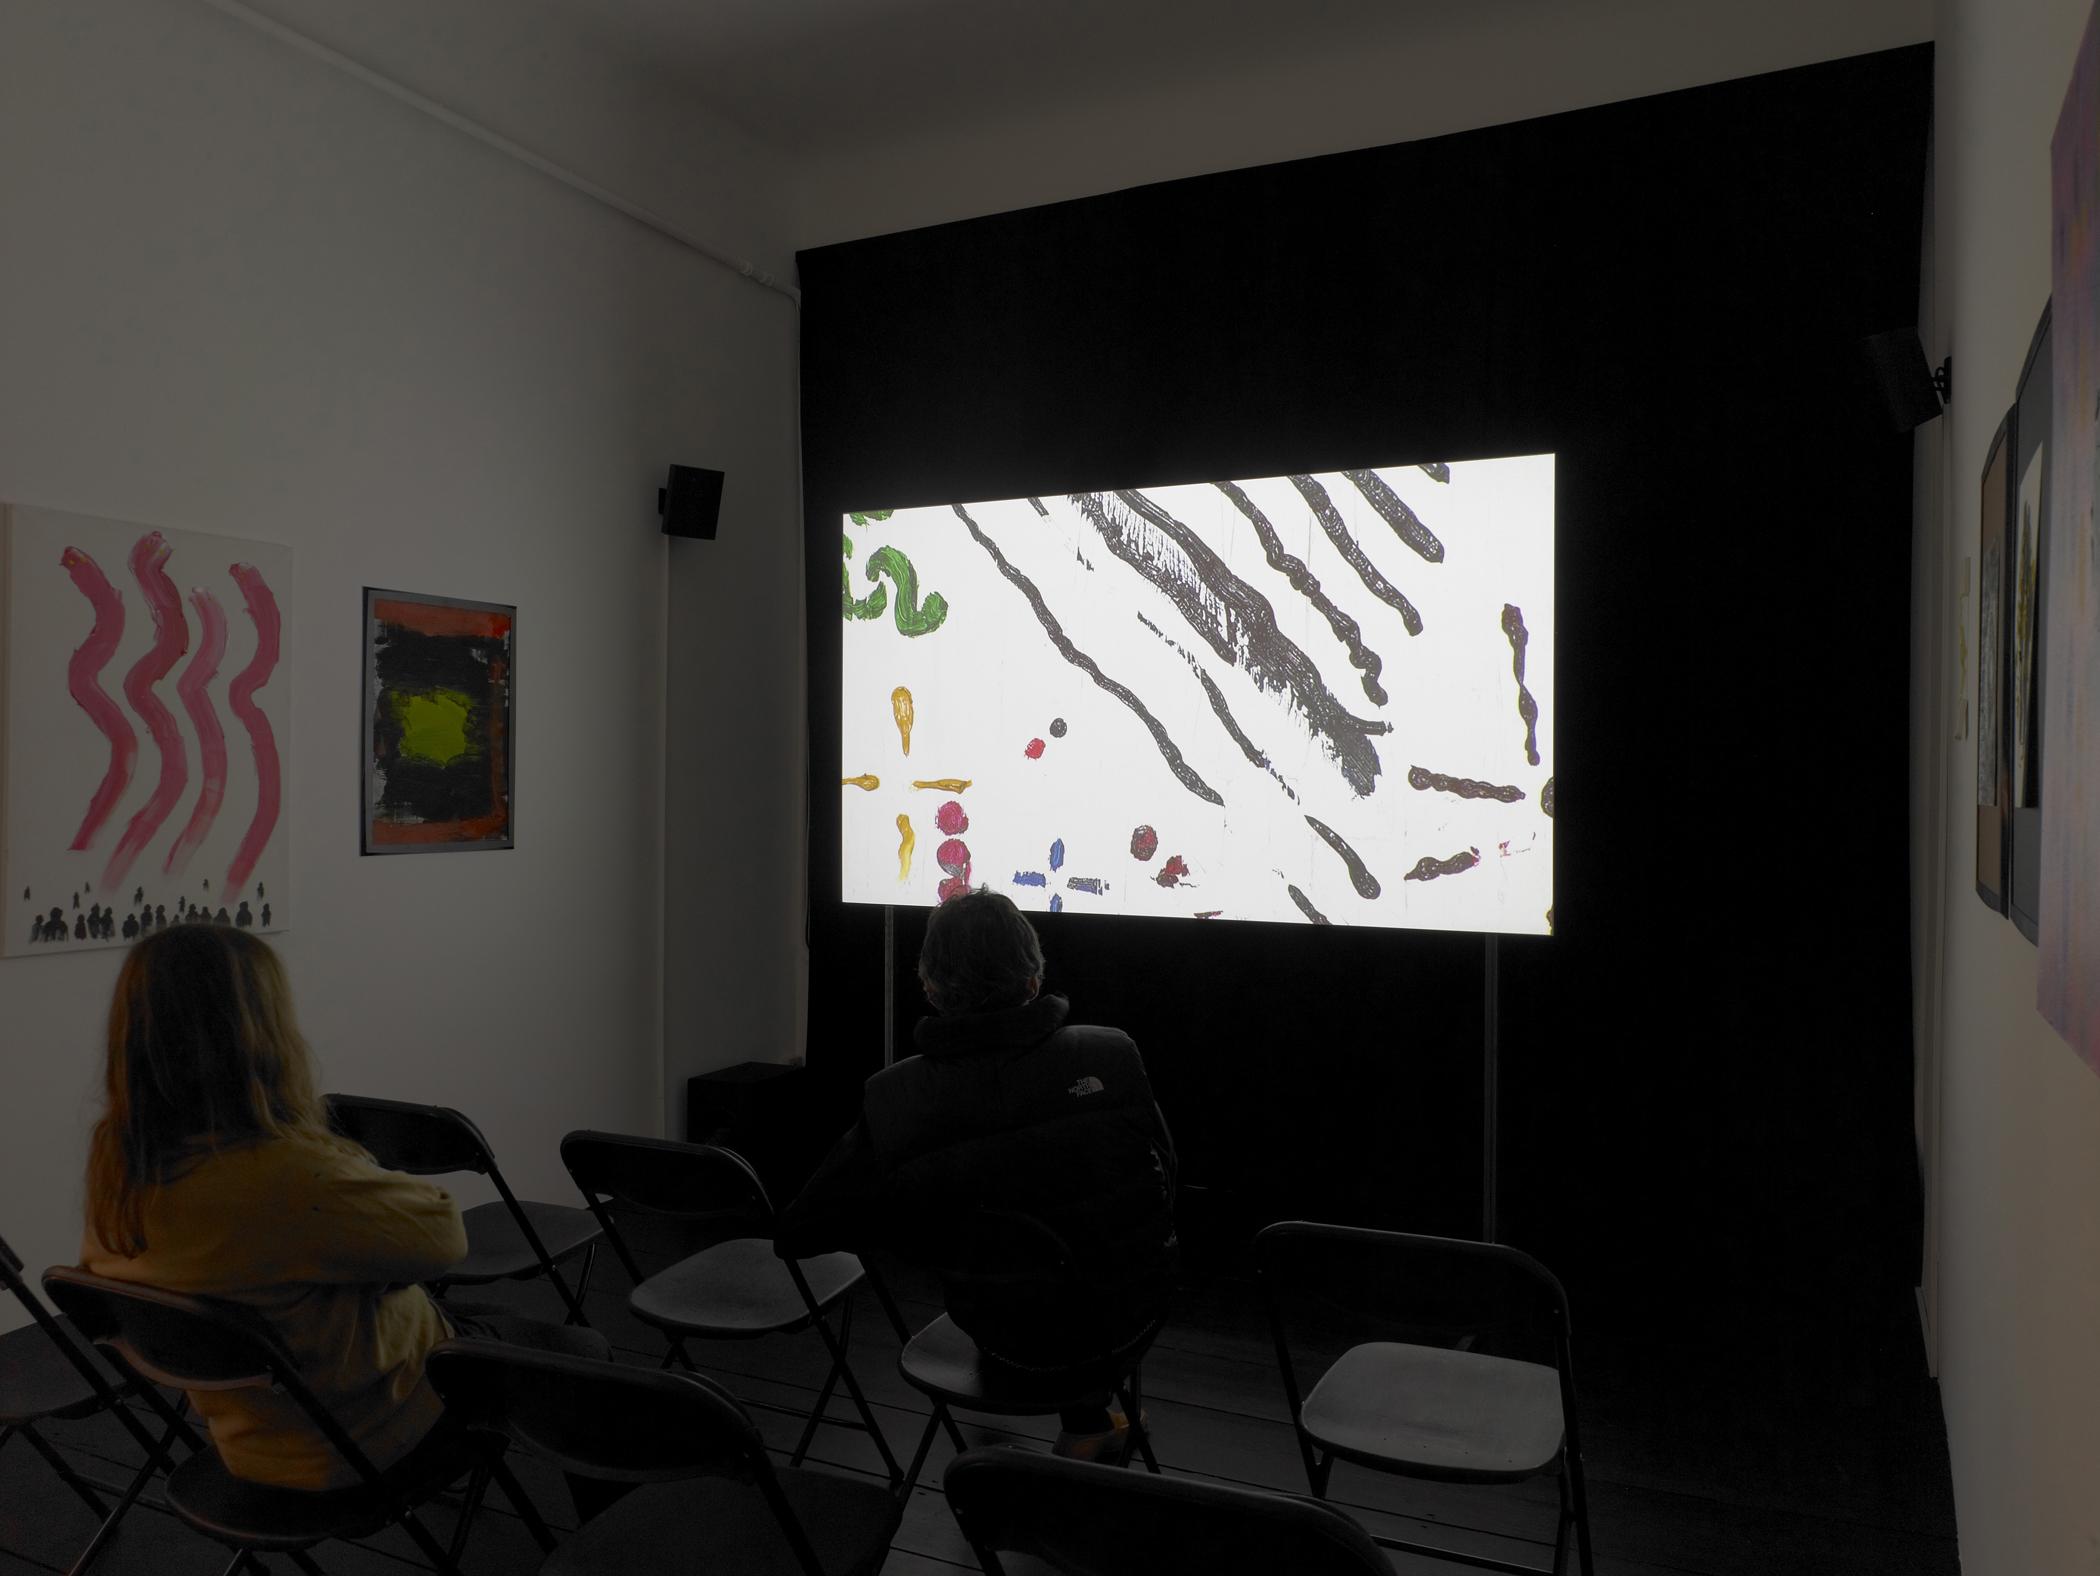 Two audience members watch a video projection of abstract painted lines on a white background in a dark room with paintings